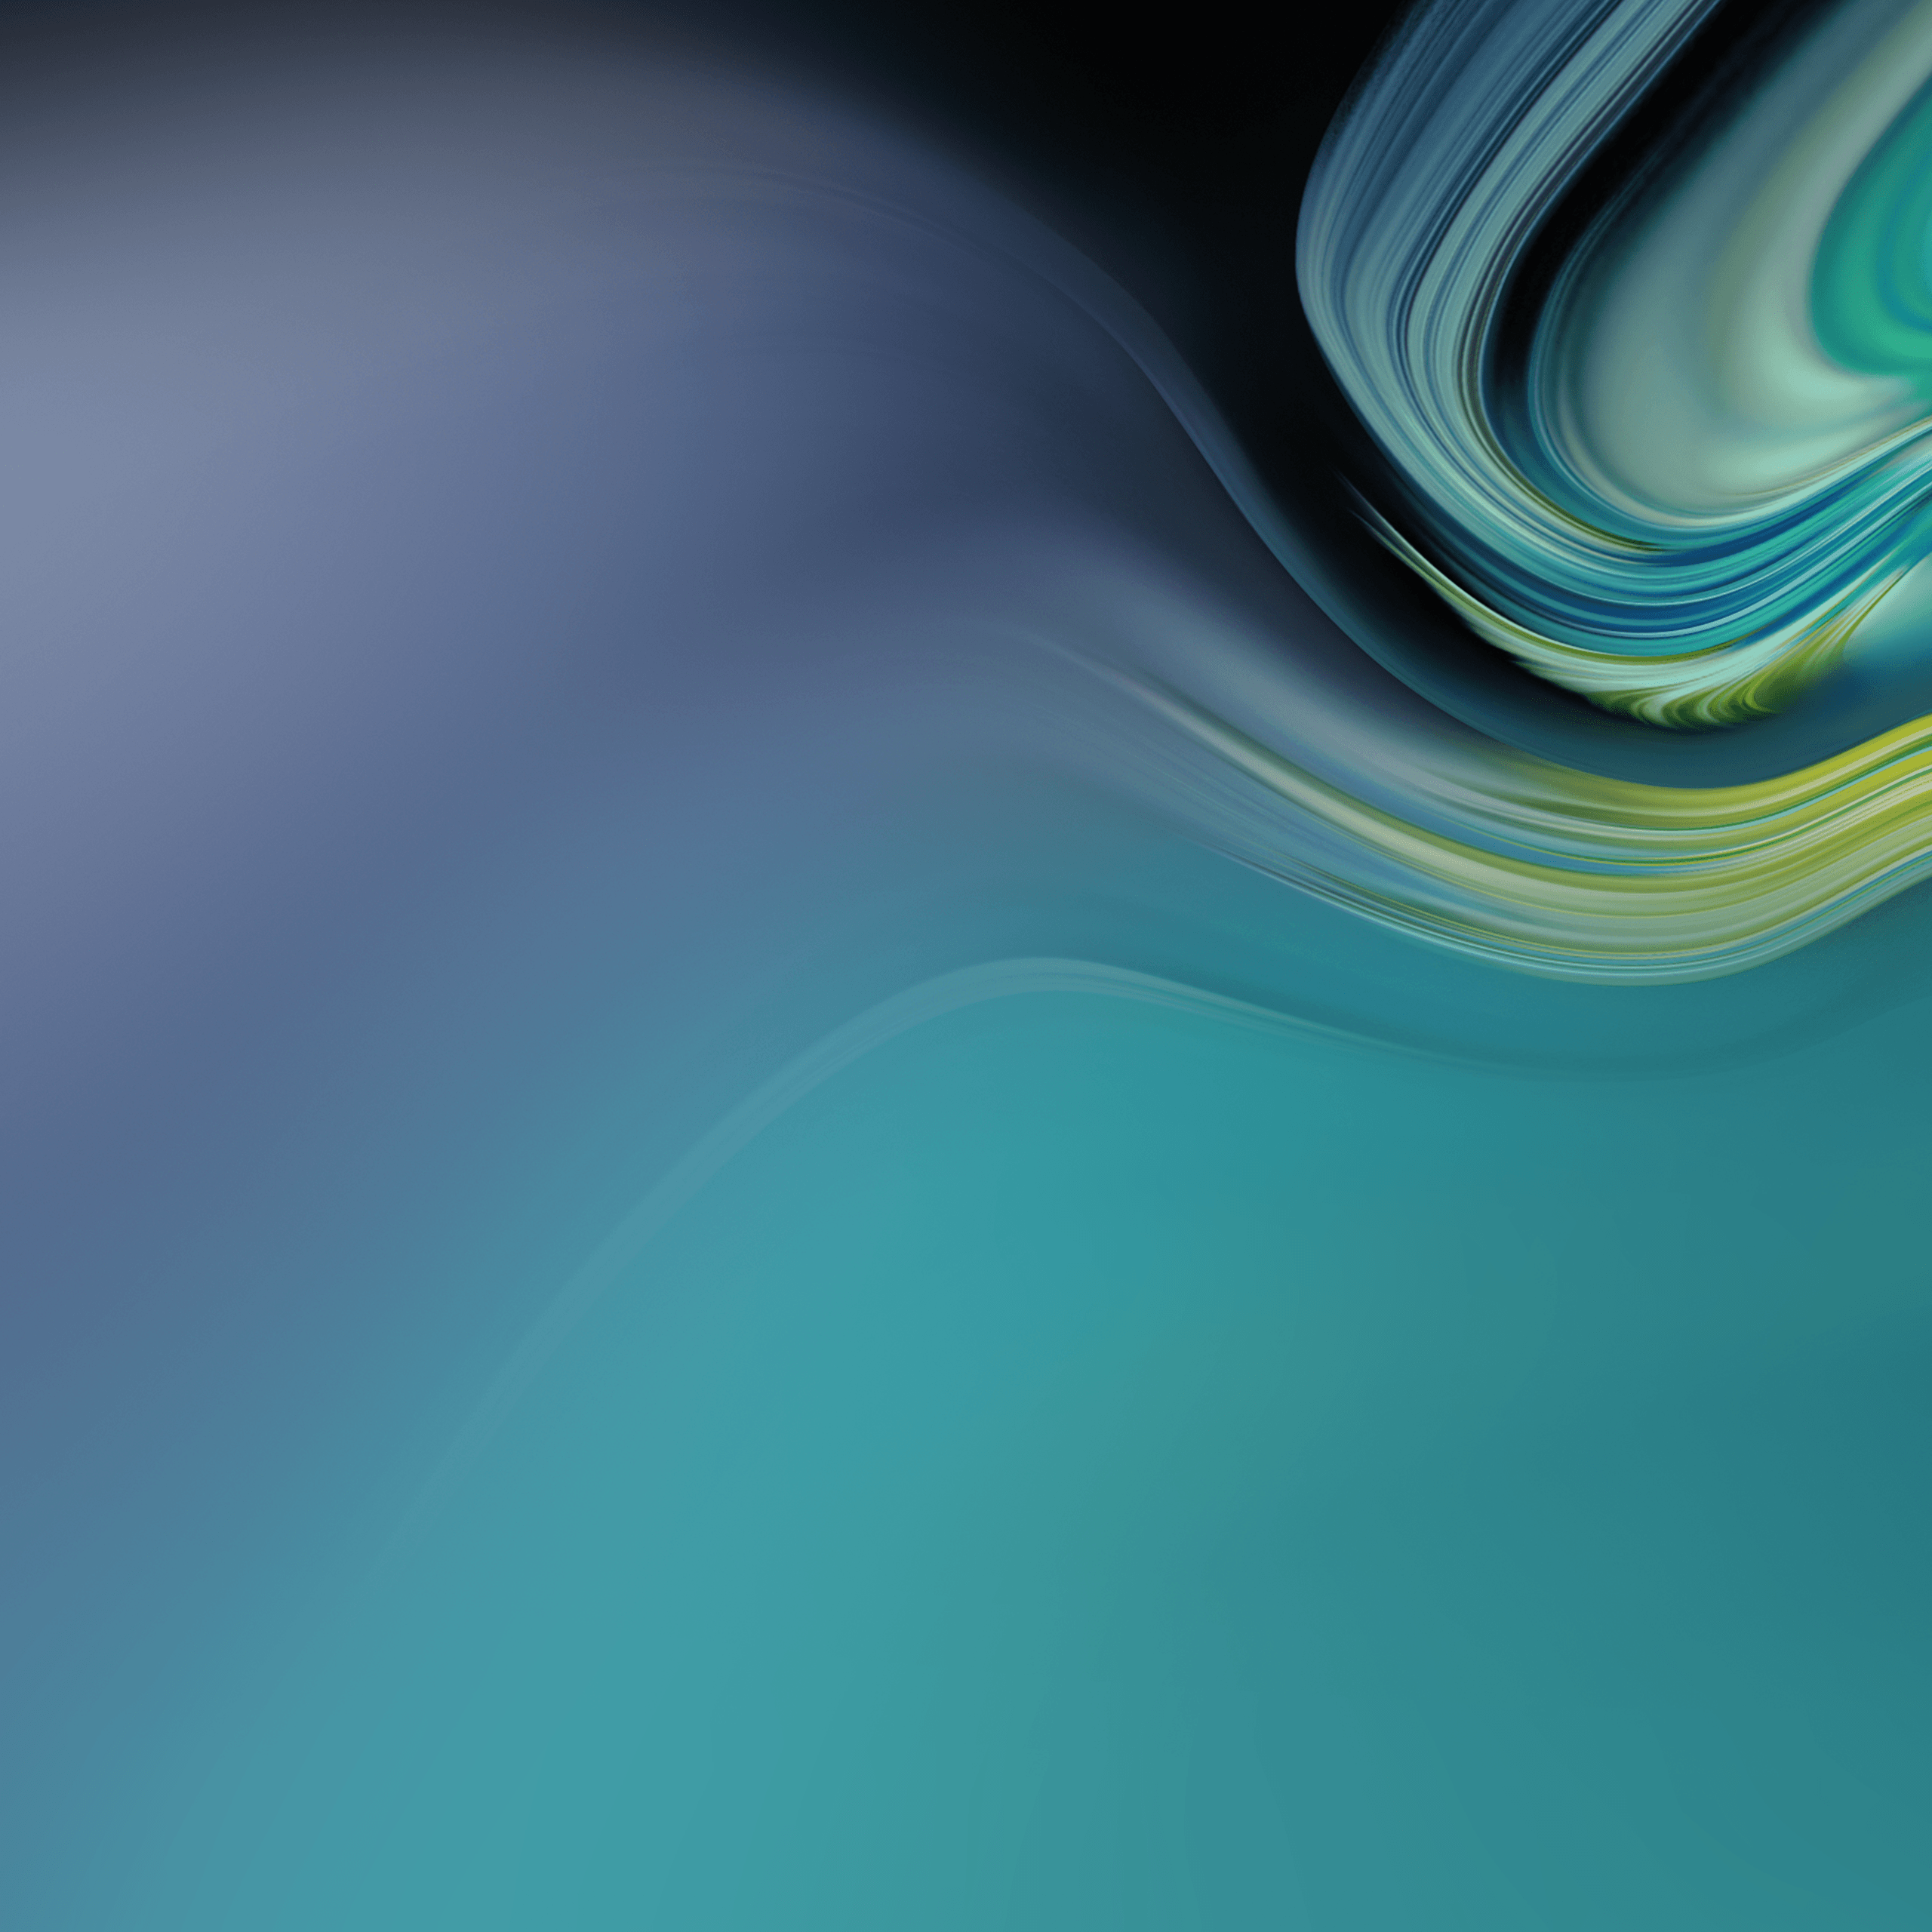 Galaxy Tab S4 wallpaper are here for your viewing pleasure